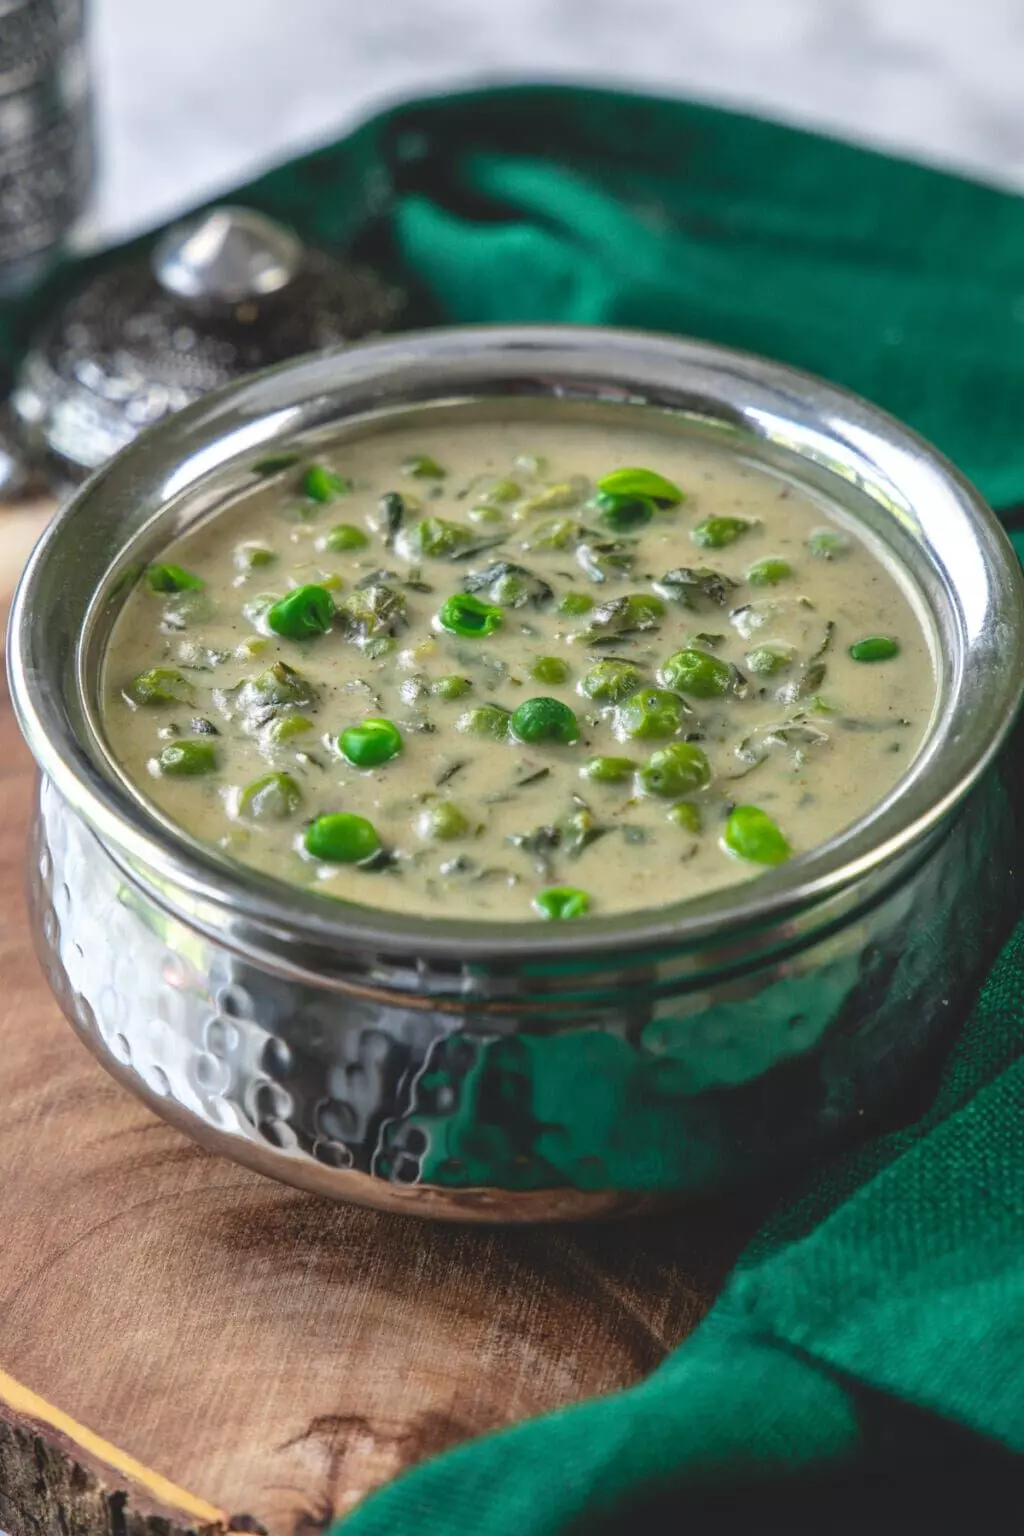 A delight sabji with no turmeric and red chilly powder: Methi Matar Malai